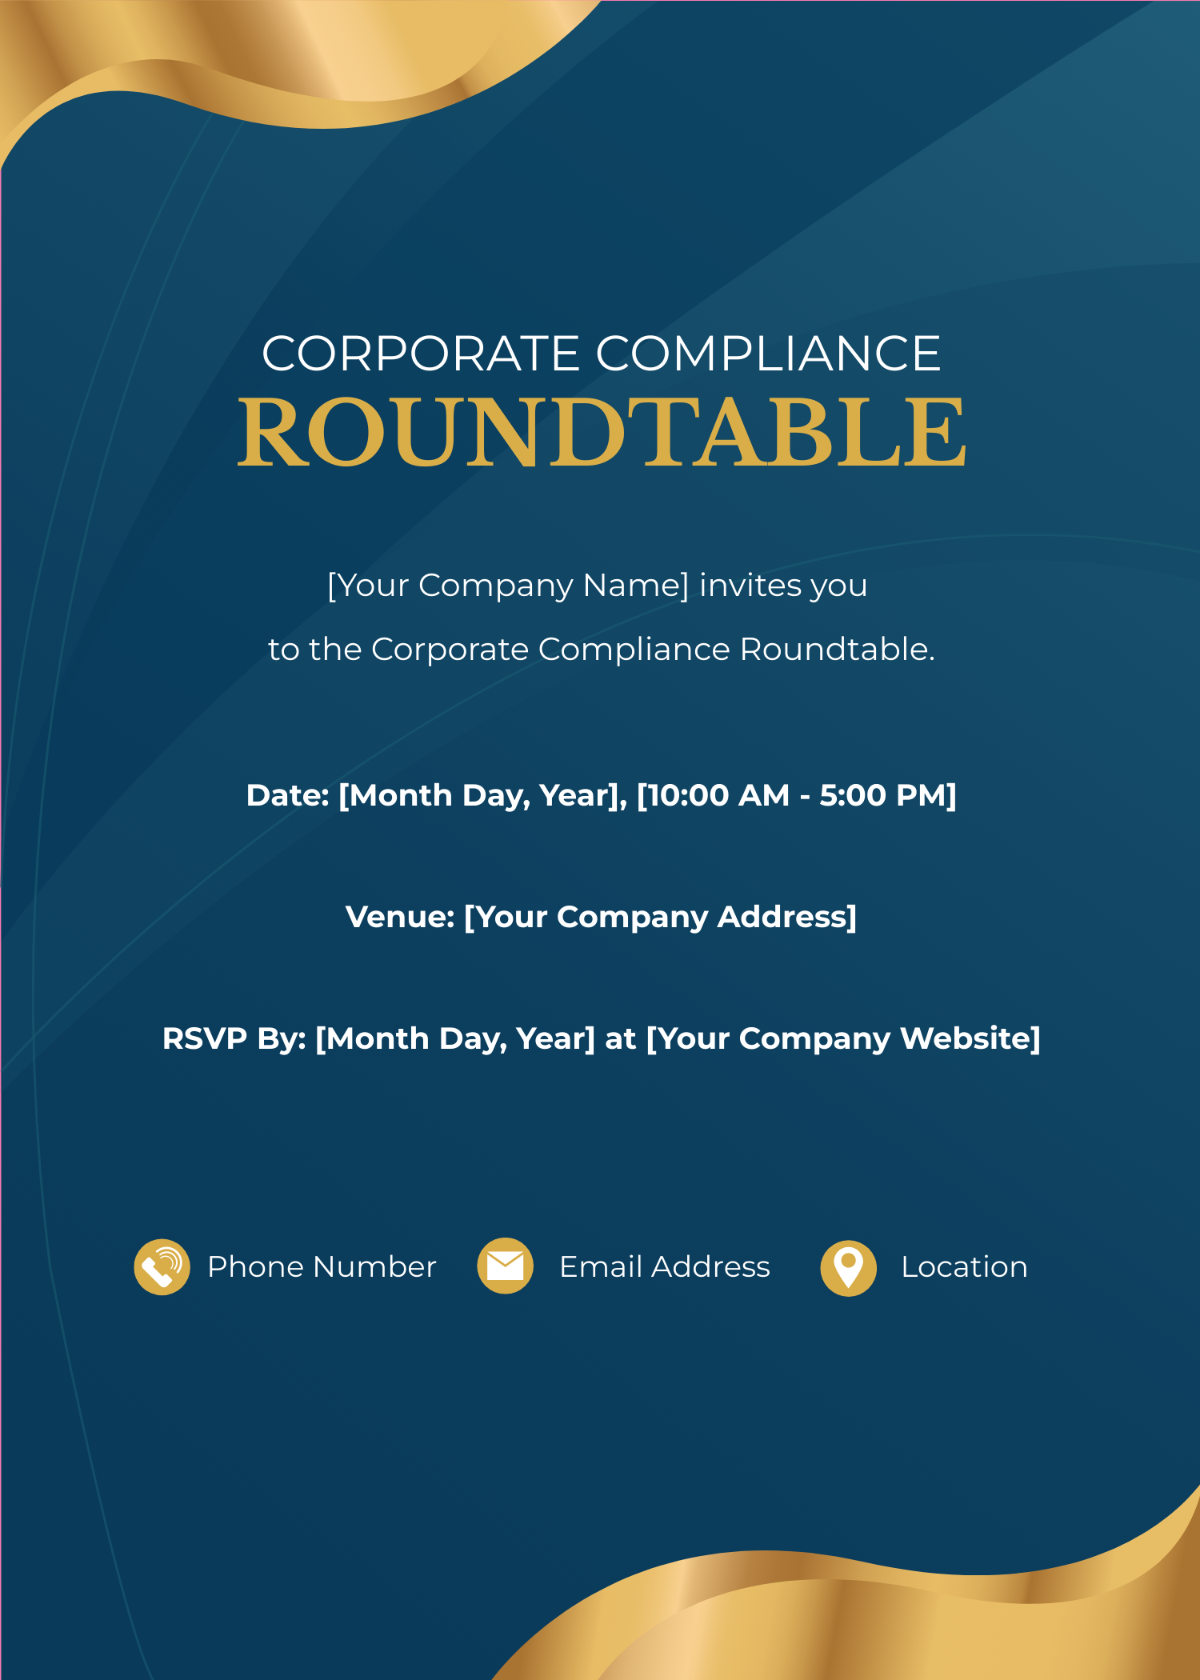 Corporate Compliance Roundtable Invitation Card